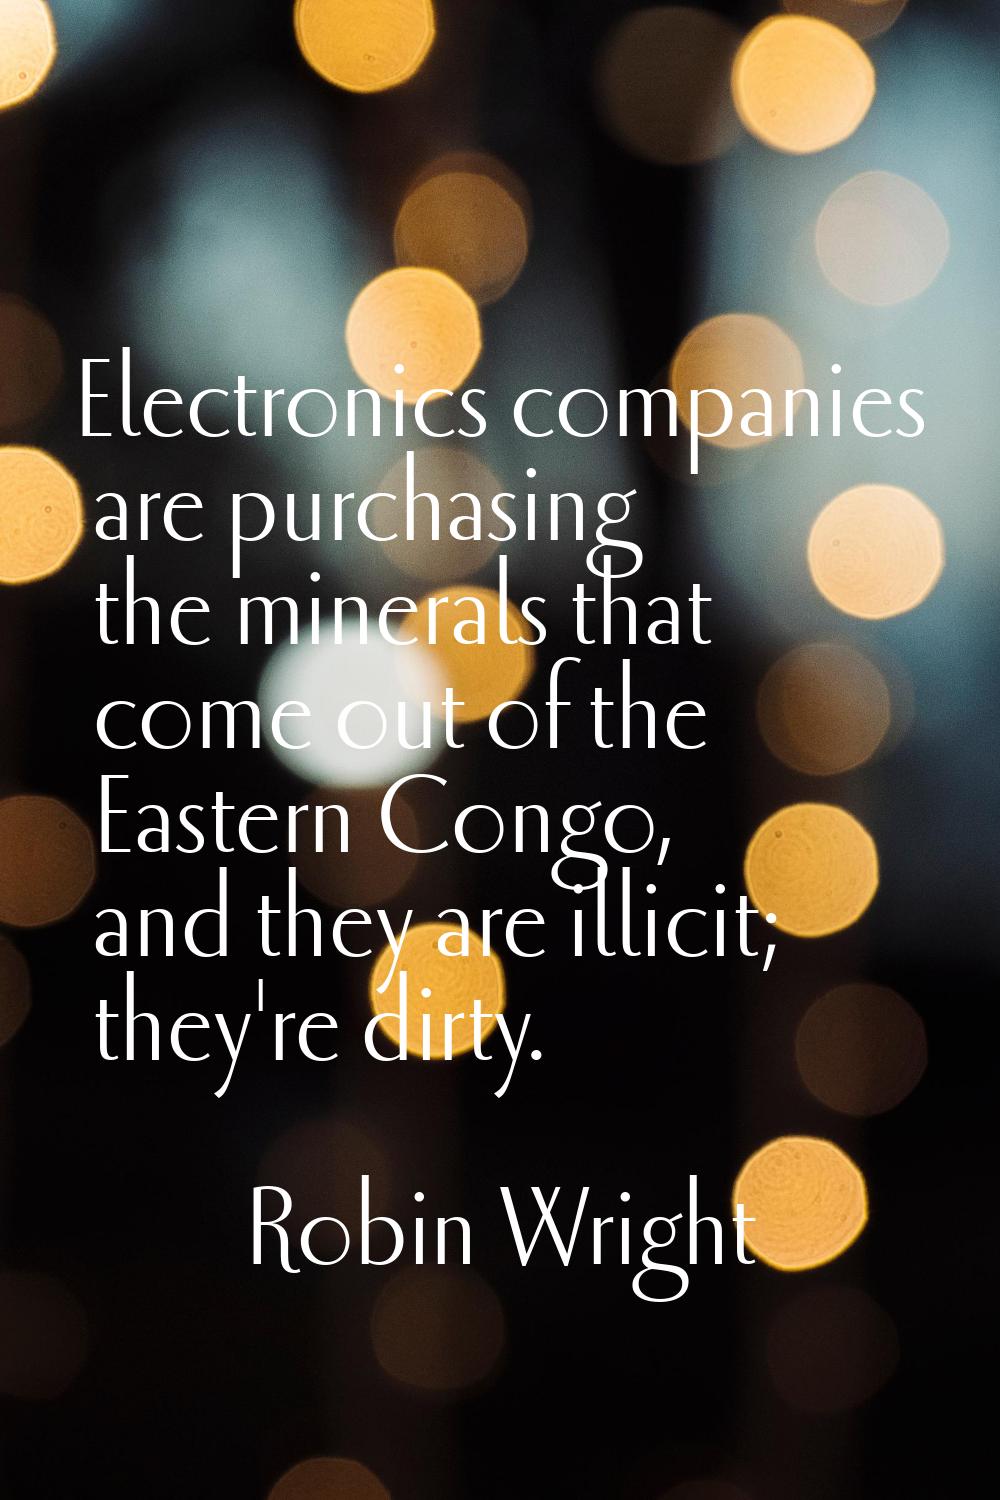 Electronics companies are purchasing the minerals that come out of the Eastern Congo, and they are 